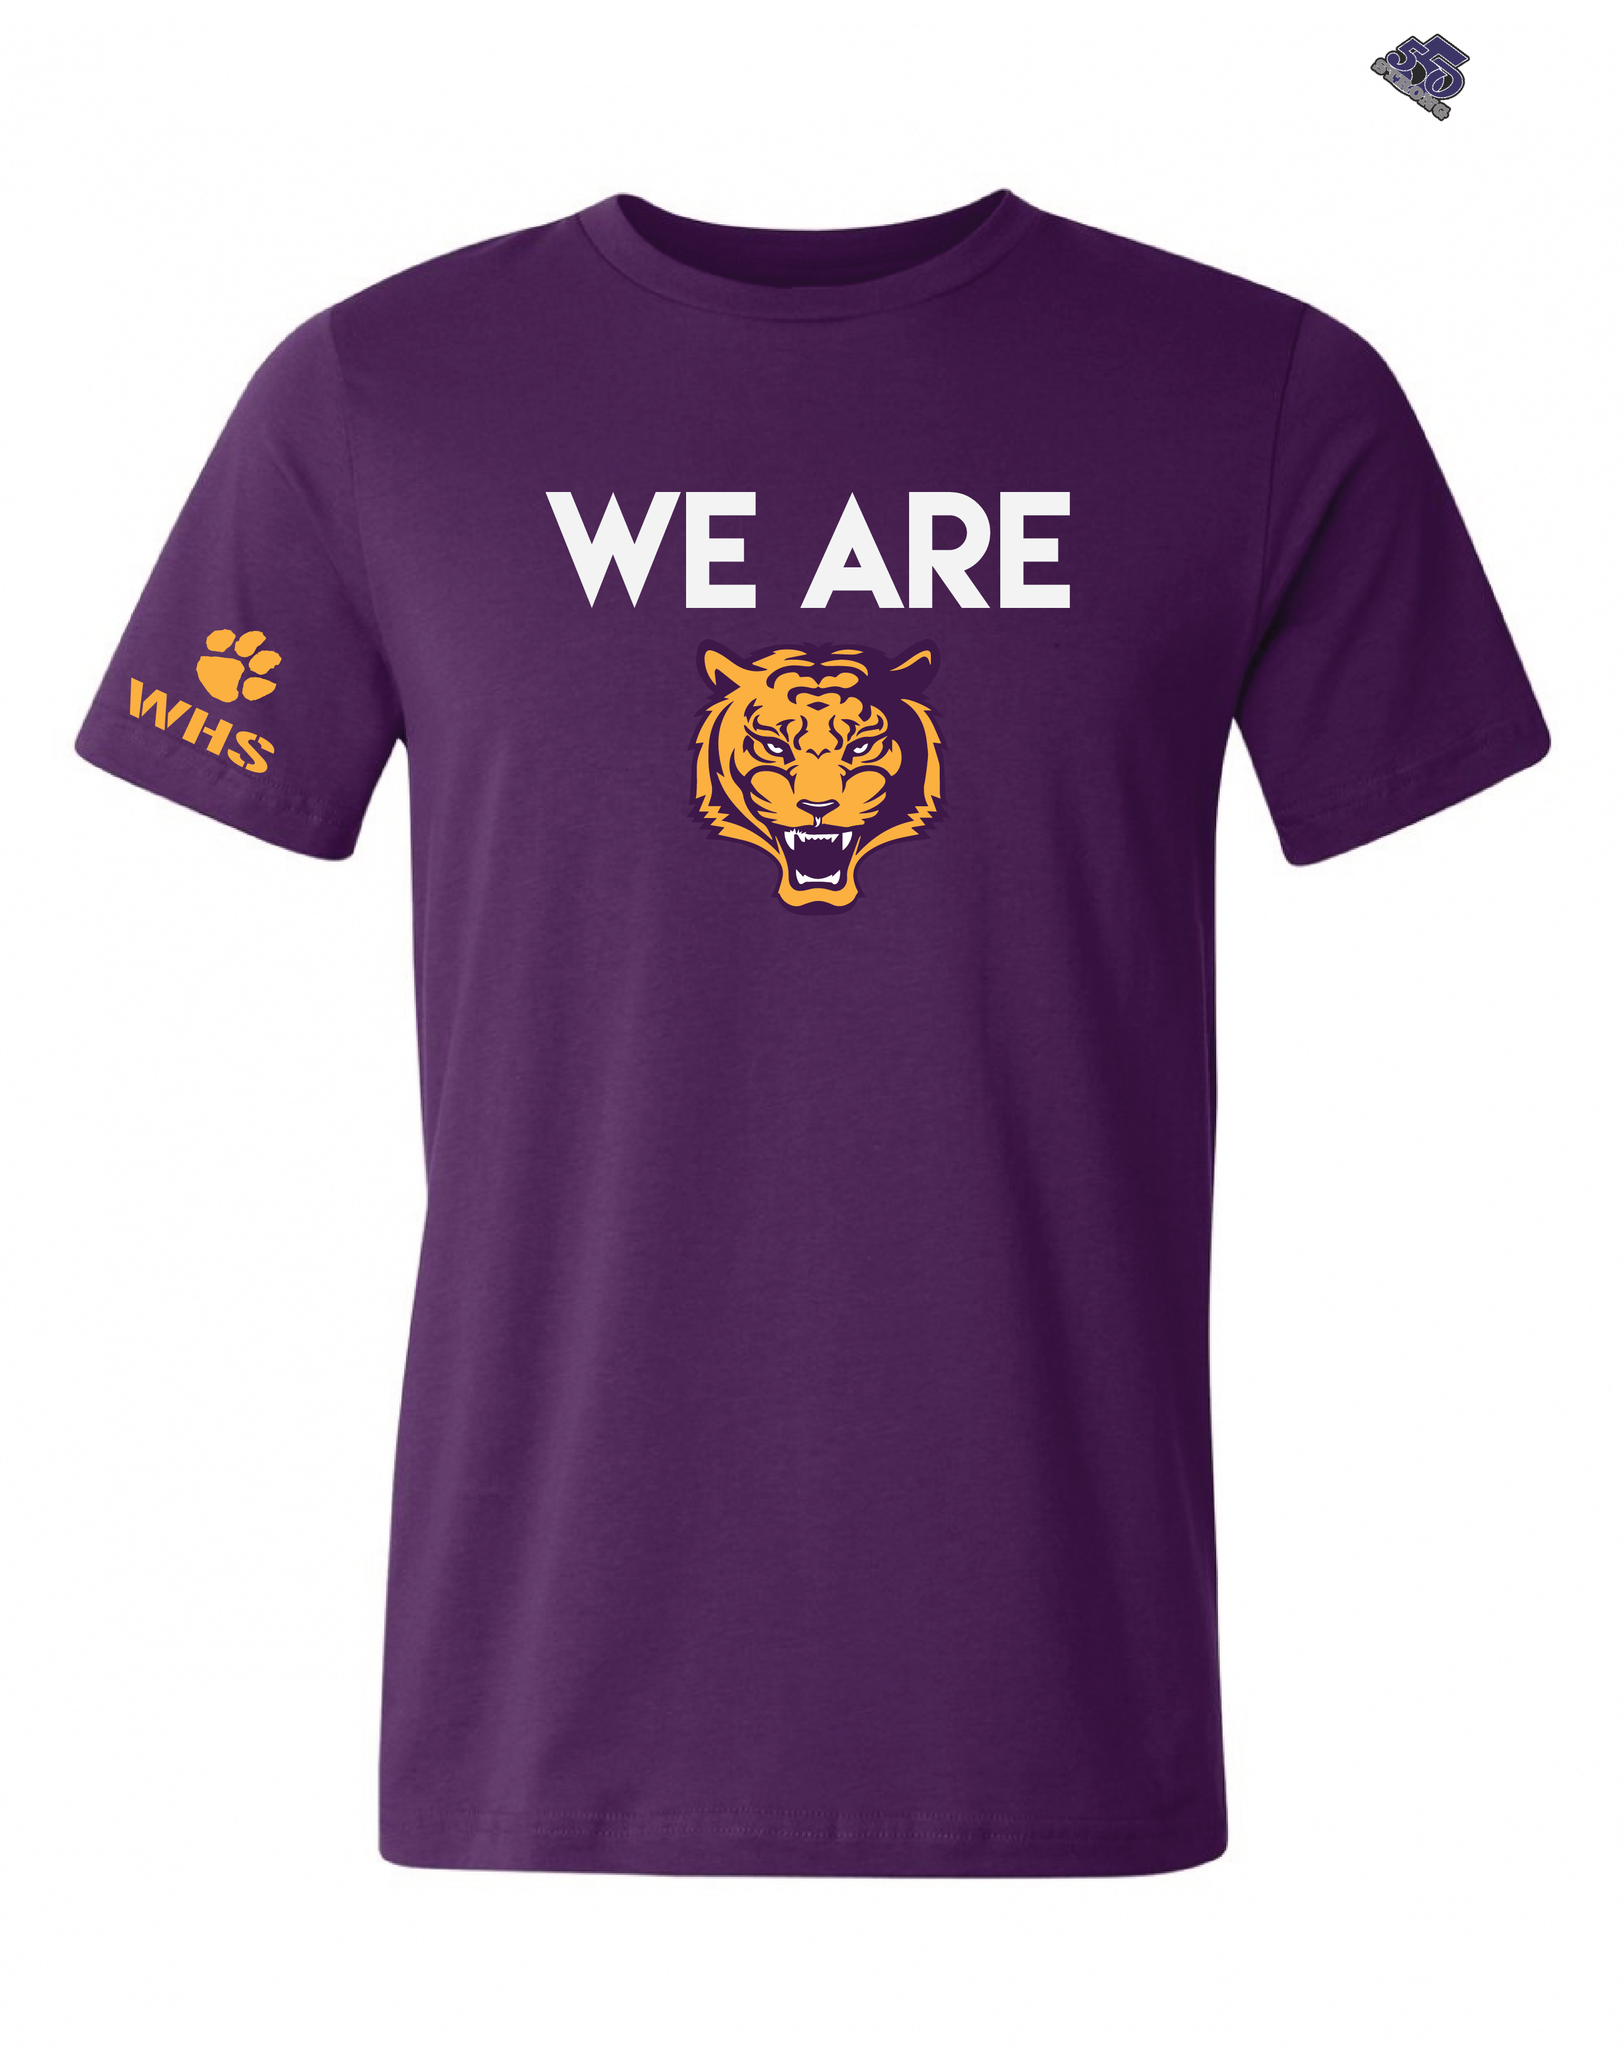 HS - We Are Wilson (Tigers) High School T-Shirt - Purple - 550strong